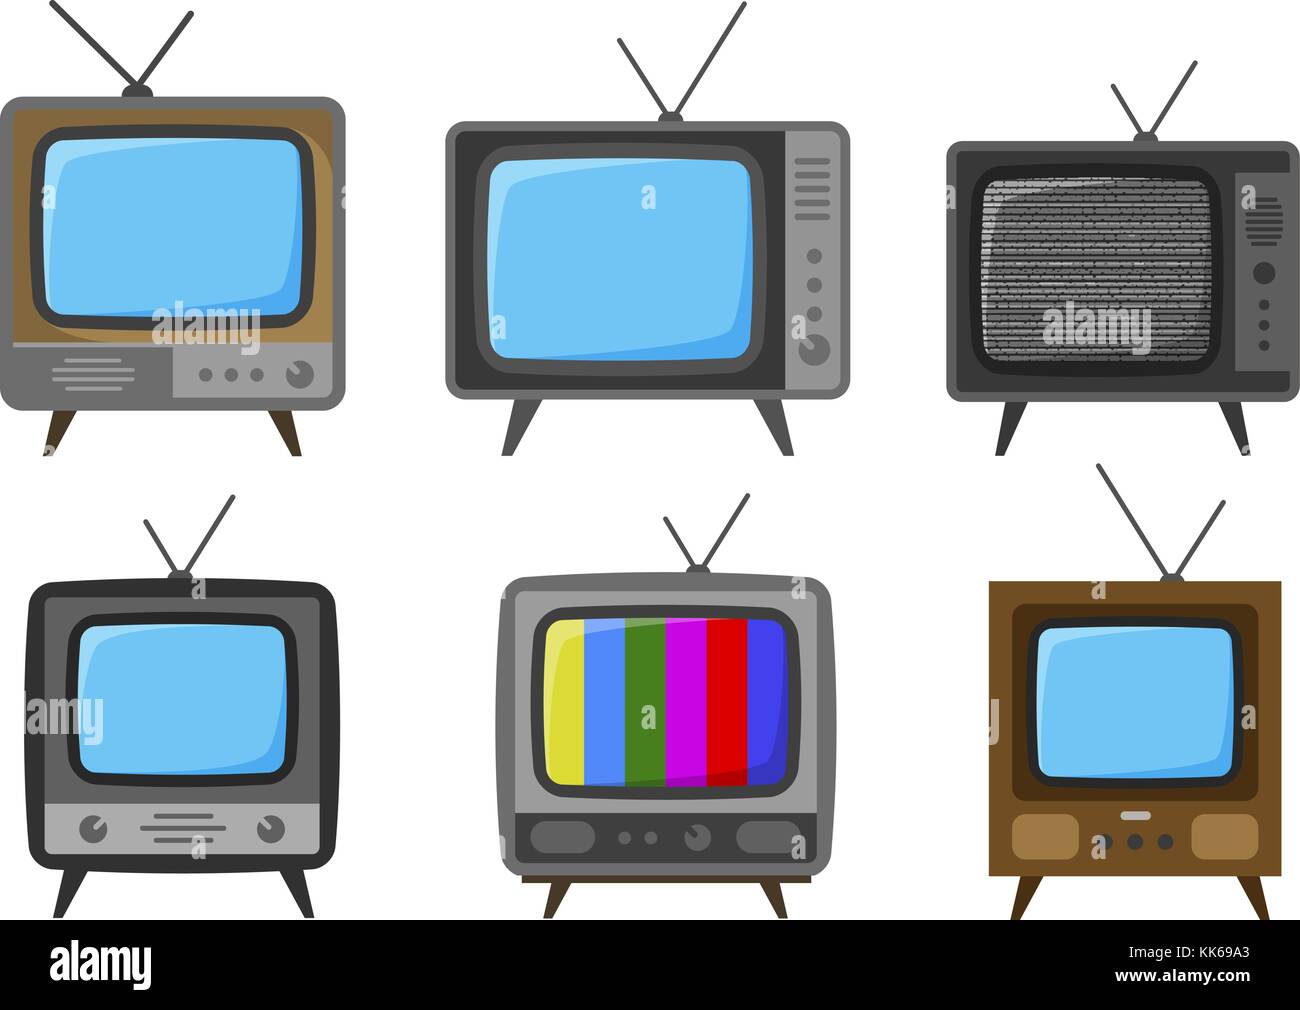 TV, television set of icons. Broadcast, video concept. Vector illustration Stock Vector